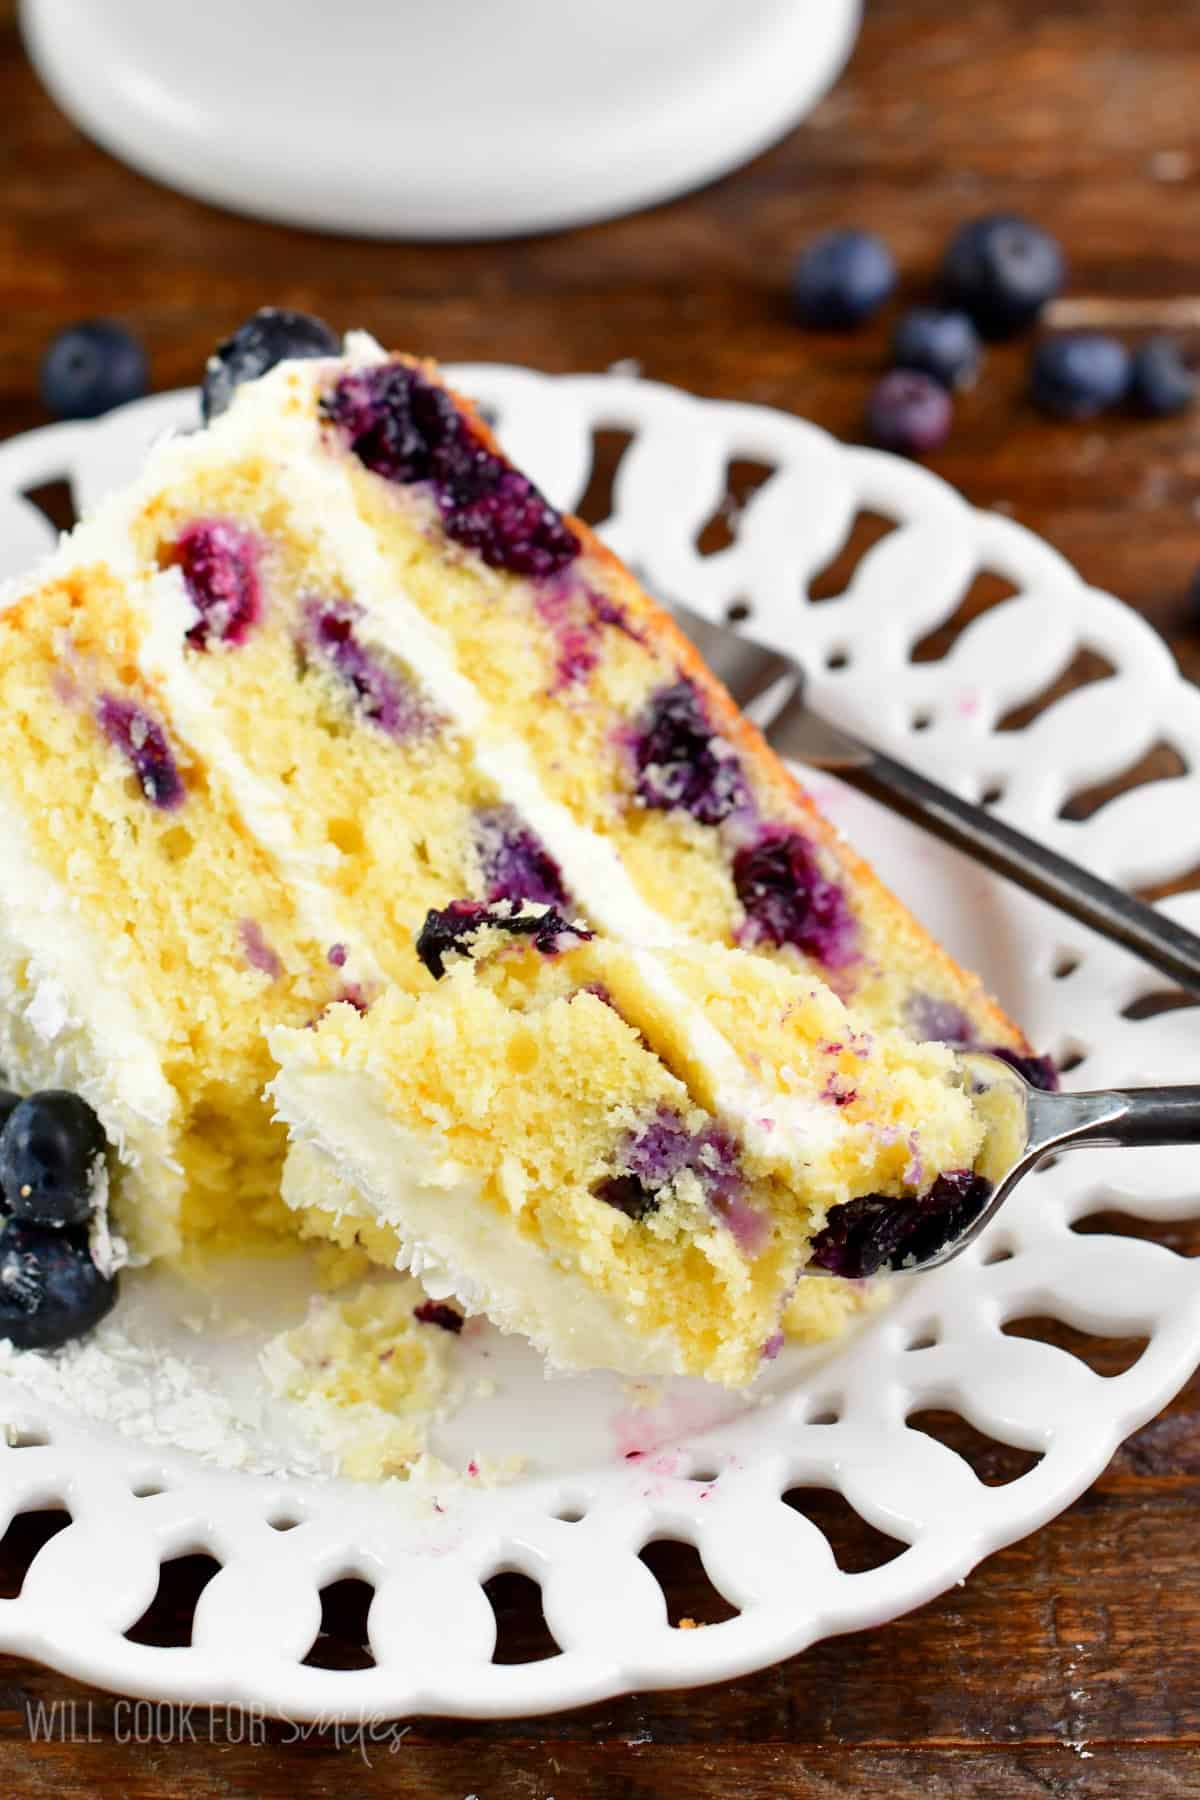 Using a fork to scoop up some of a slice of blueberry cake that is on a plate.